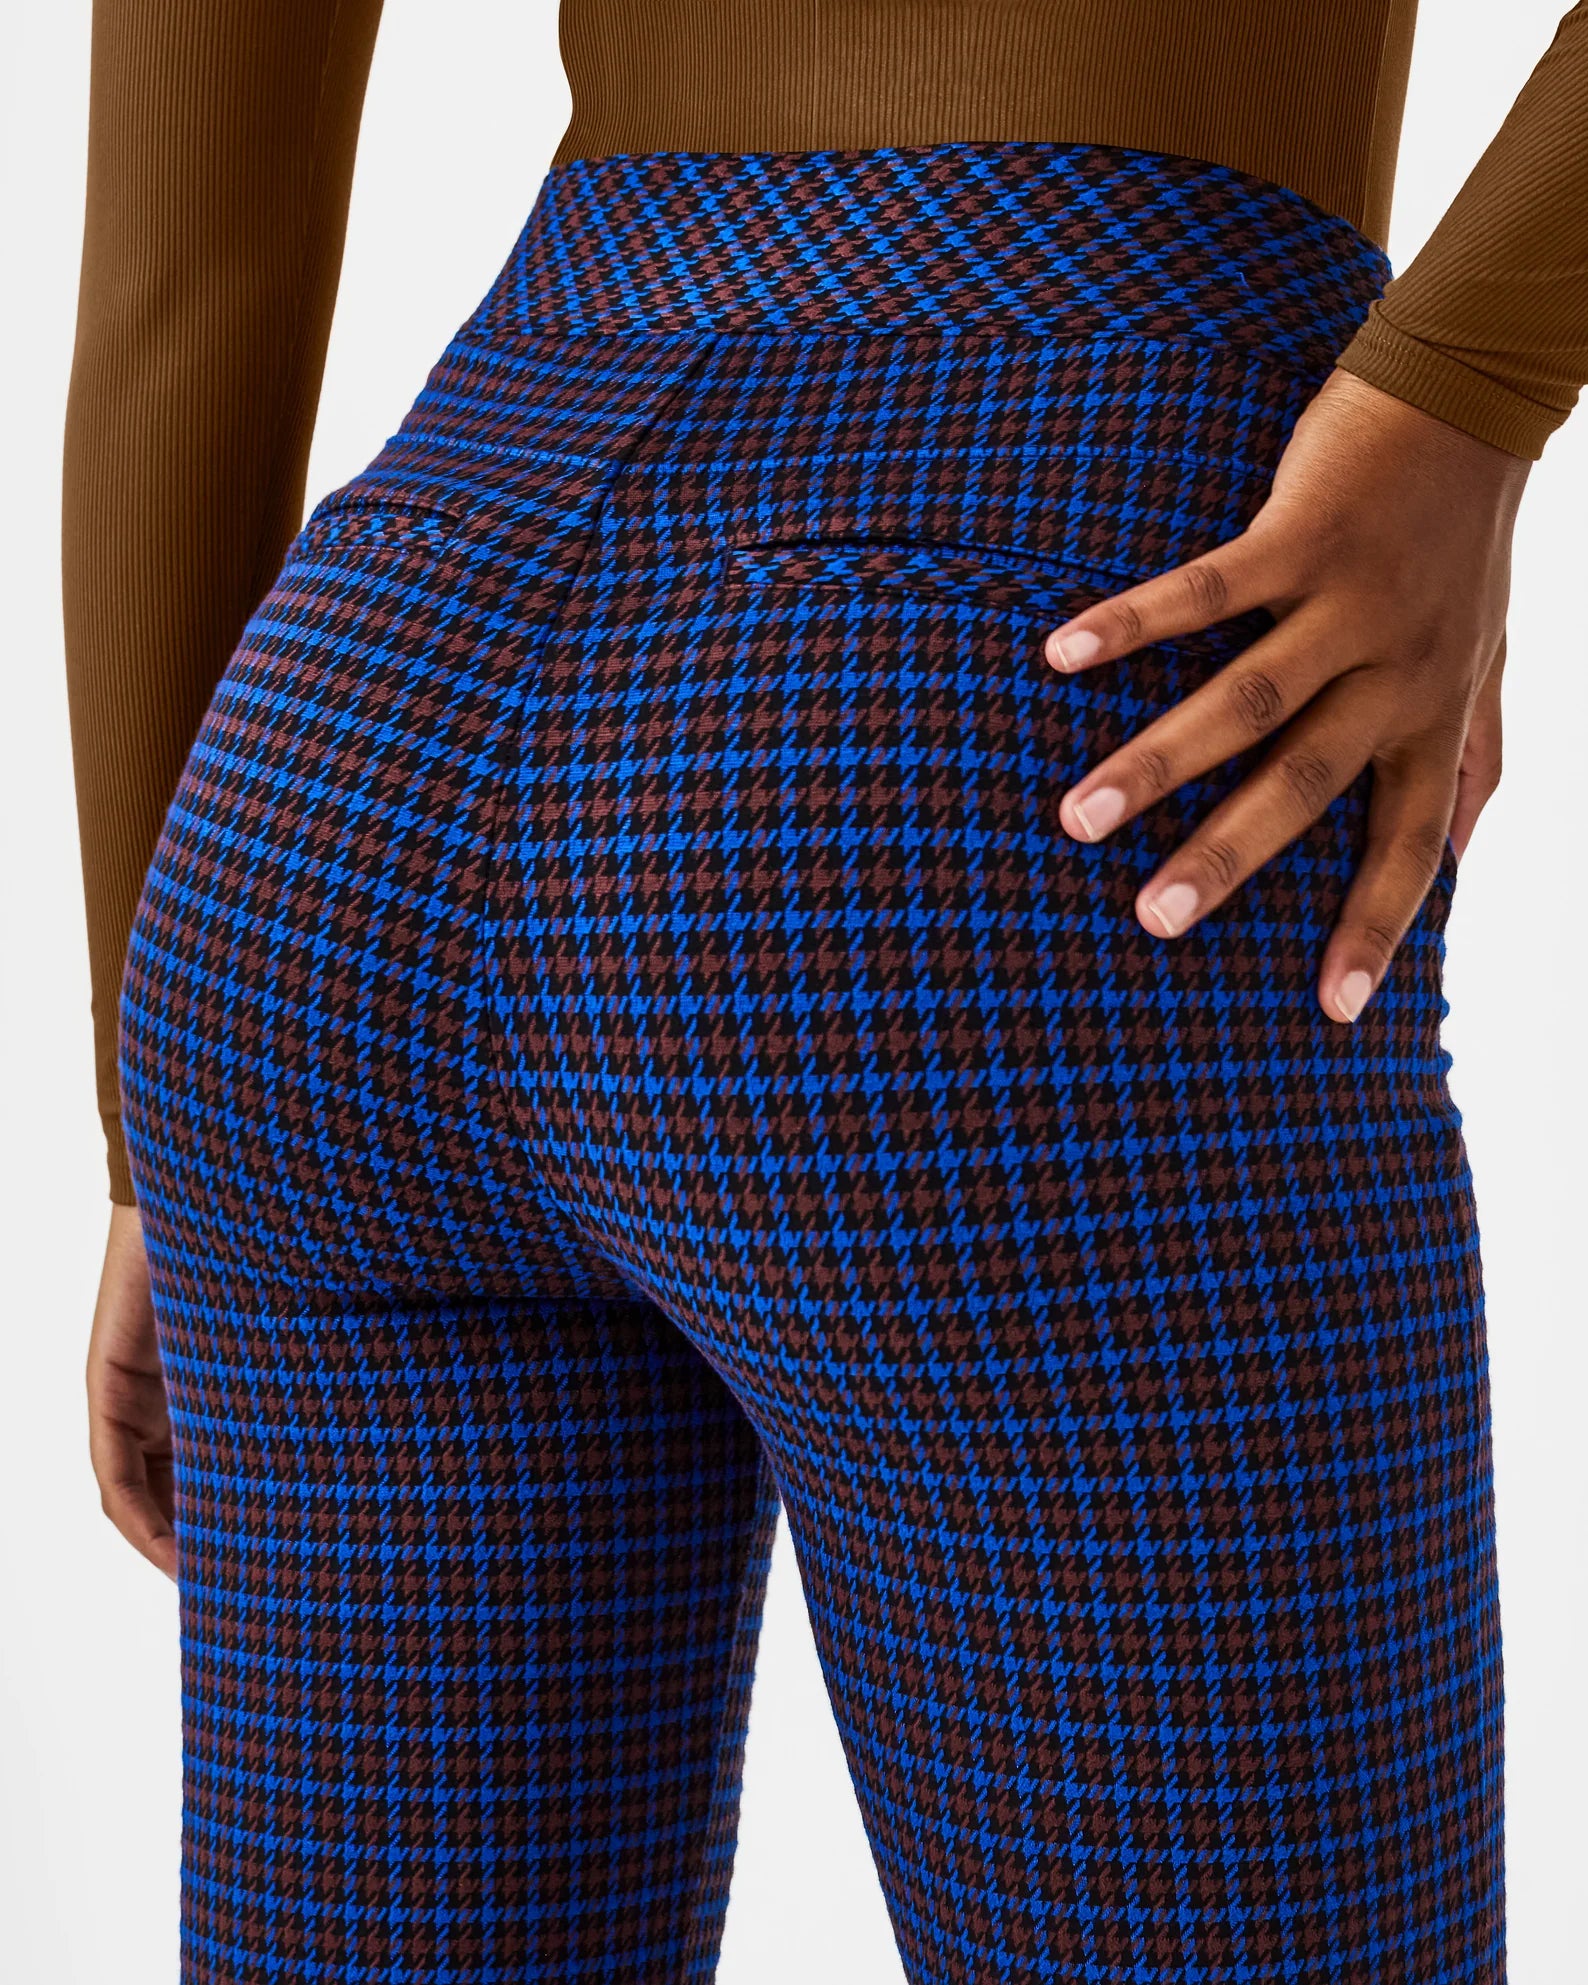 The Perfect Pant Jacquard Houndstooth